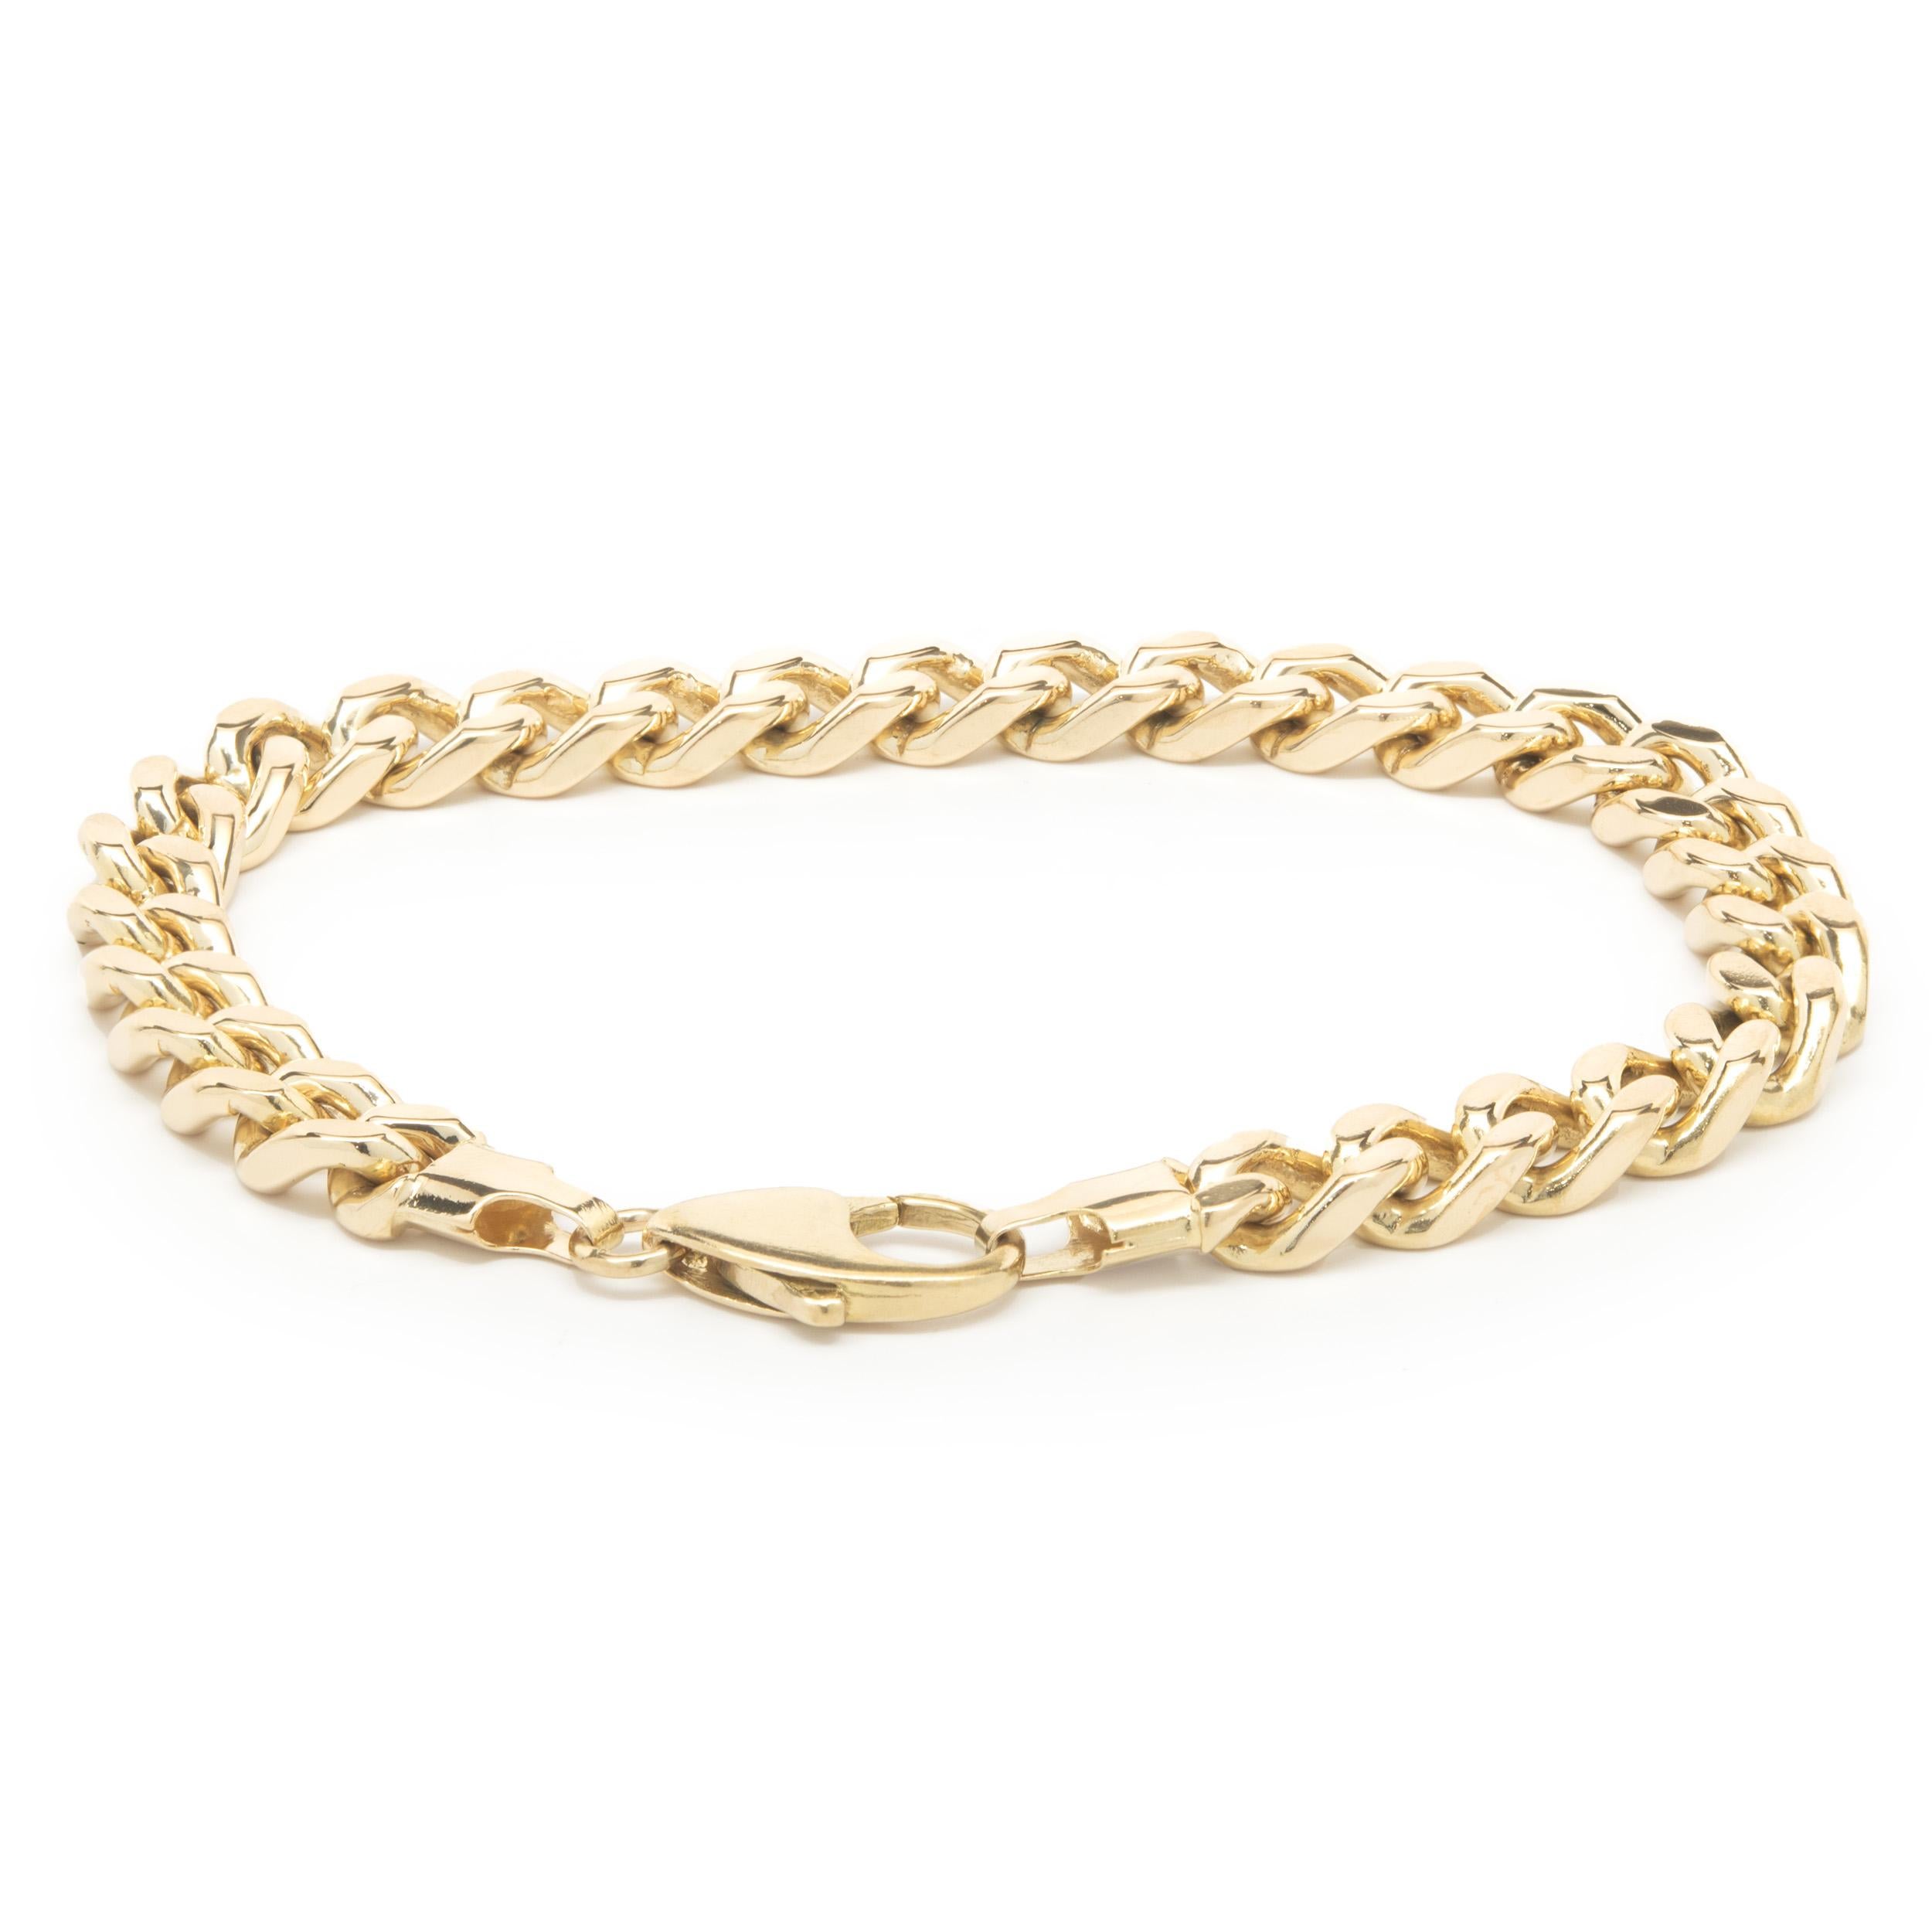 Material: 18K yellow gold
Dimension: bracelet will fit up to a 7.75-inch wrist 
Weight: 36.38 grams